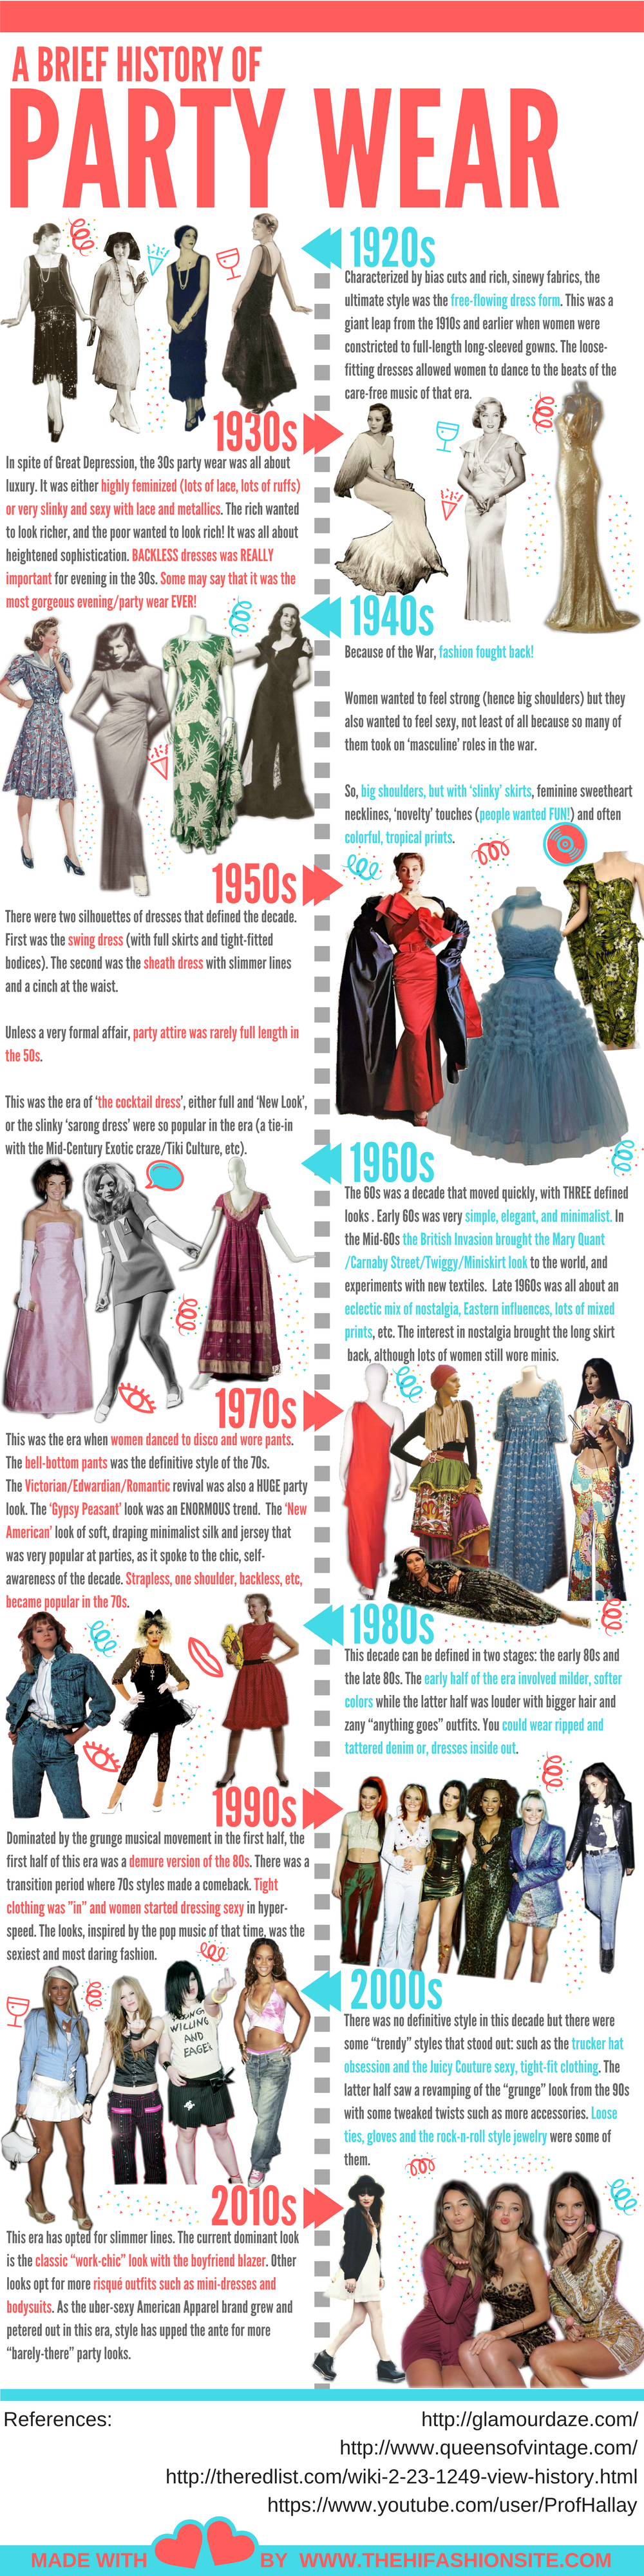 history-of-party-wear-1000x4000.png